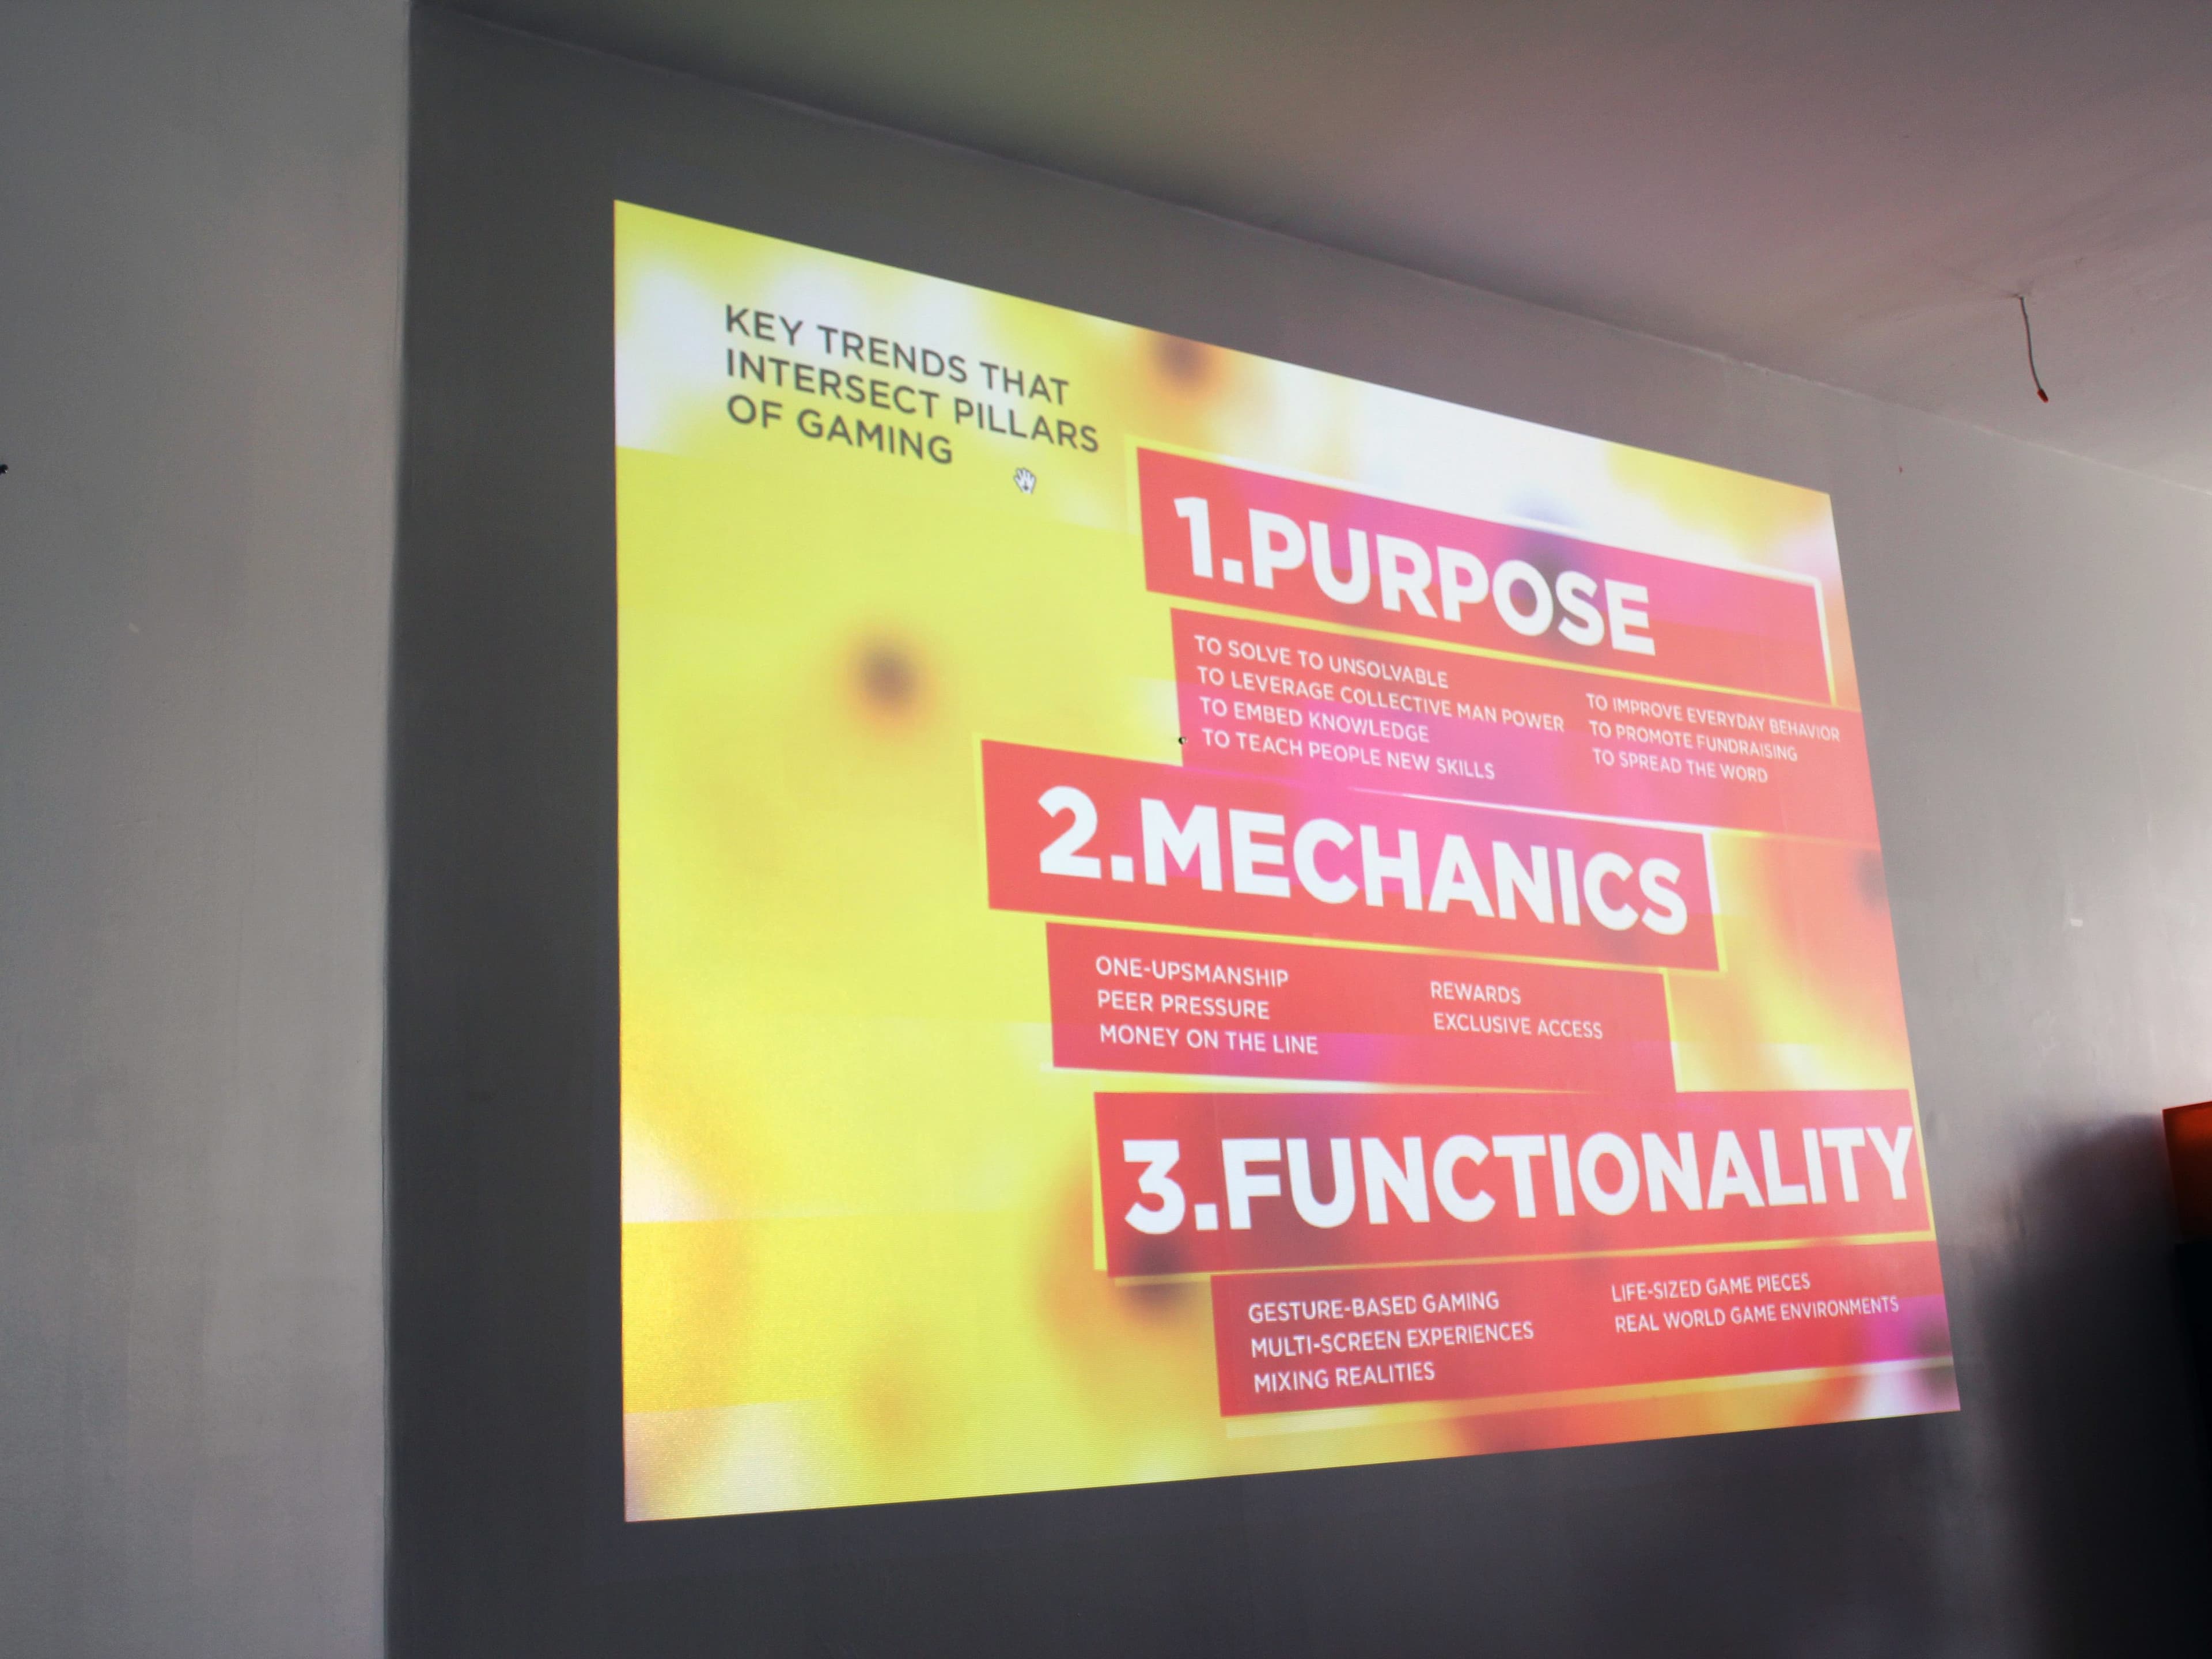 A brightly lit projector screen displays three key trends intersecting gaming pillars: 1. Purpose, 2. Mechanics, and 3. Functionality. Each trend is elaborated with bullet points in white text against red and orange highlighted areas on a gradient yellow and orange background.